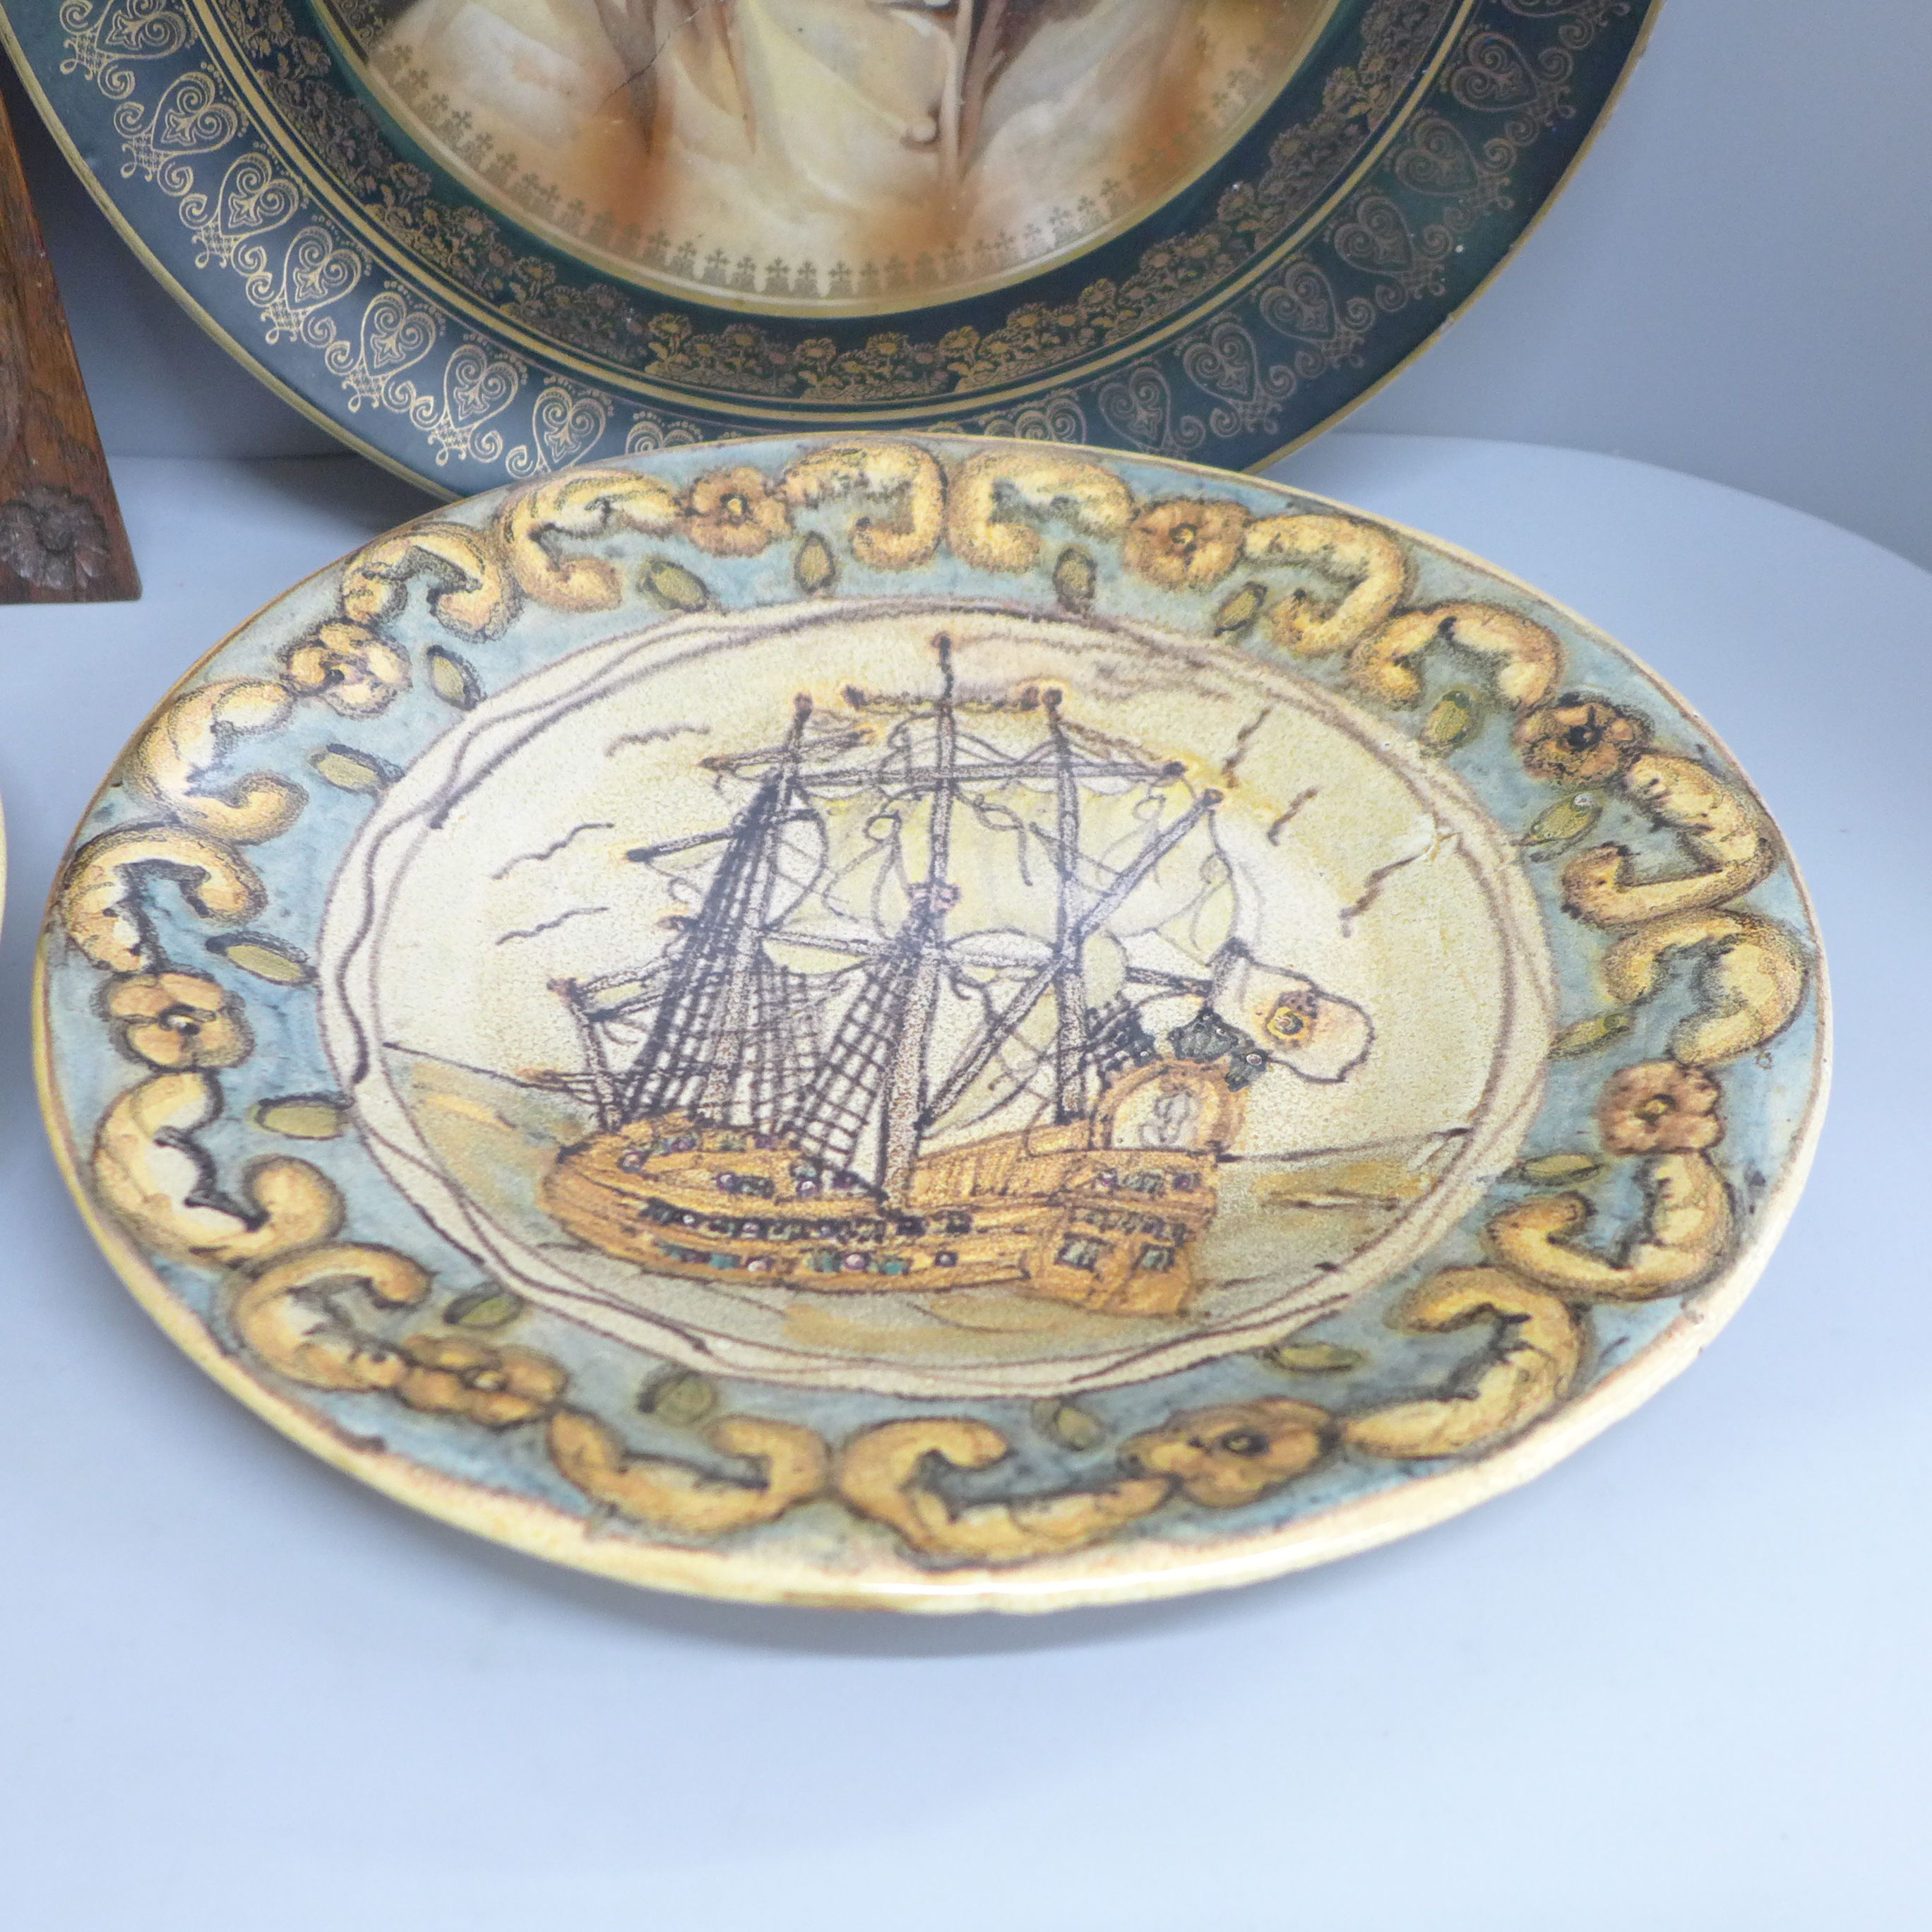 An Arts and Crafts style carved wooden plaque, two Portuguese plates and a charger with portrait - Image 2 of 4